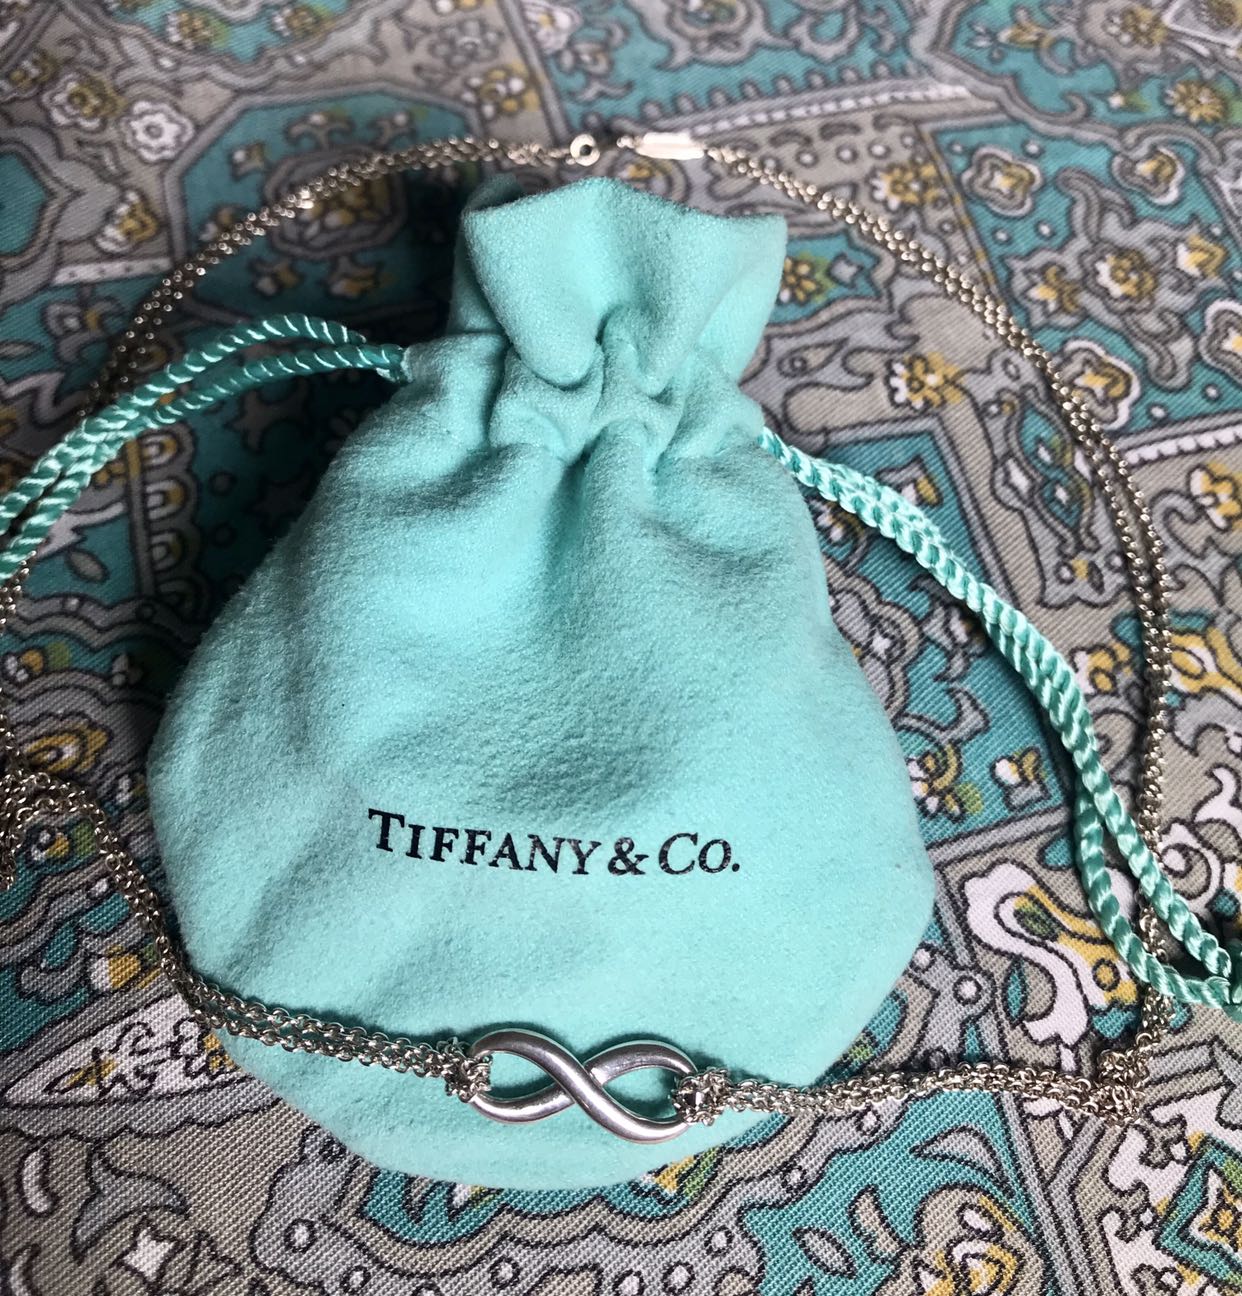 tiffany co infinity necklace authentic 1552288134 bdc7759d